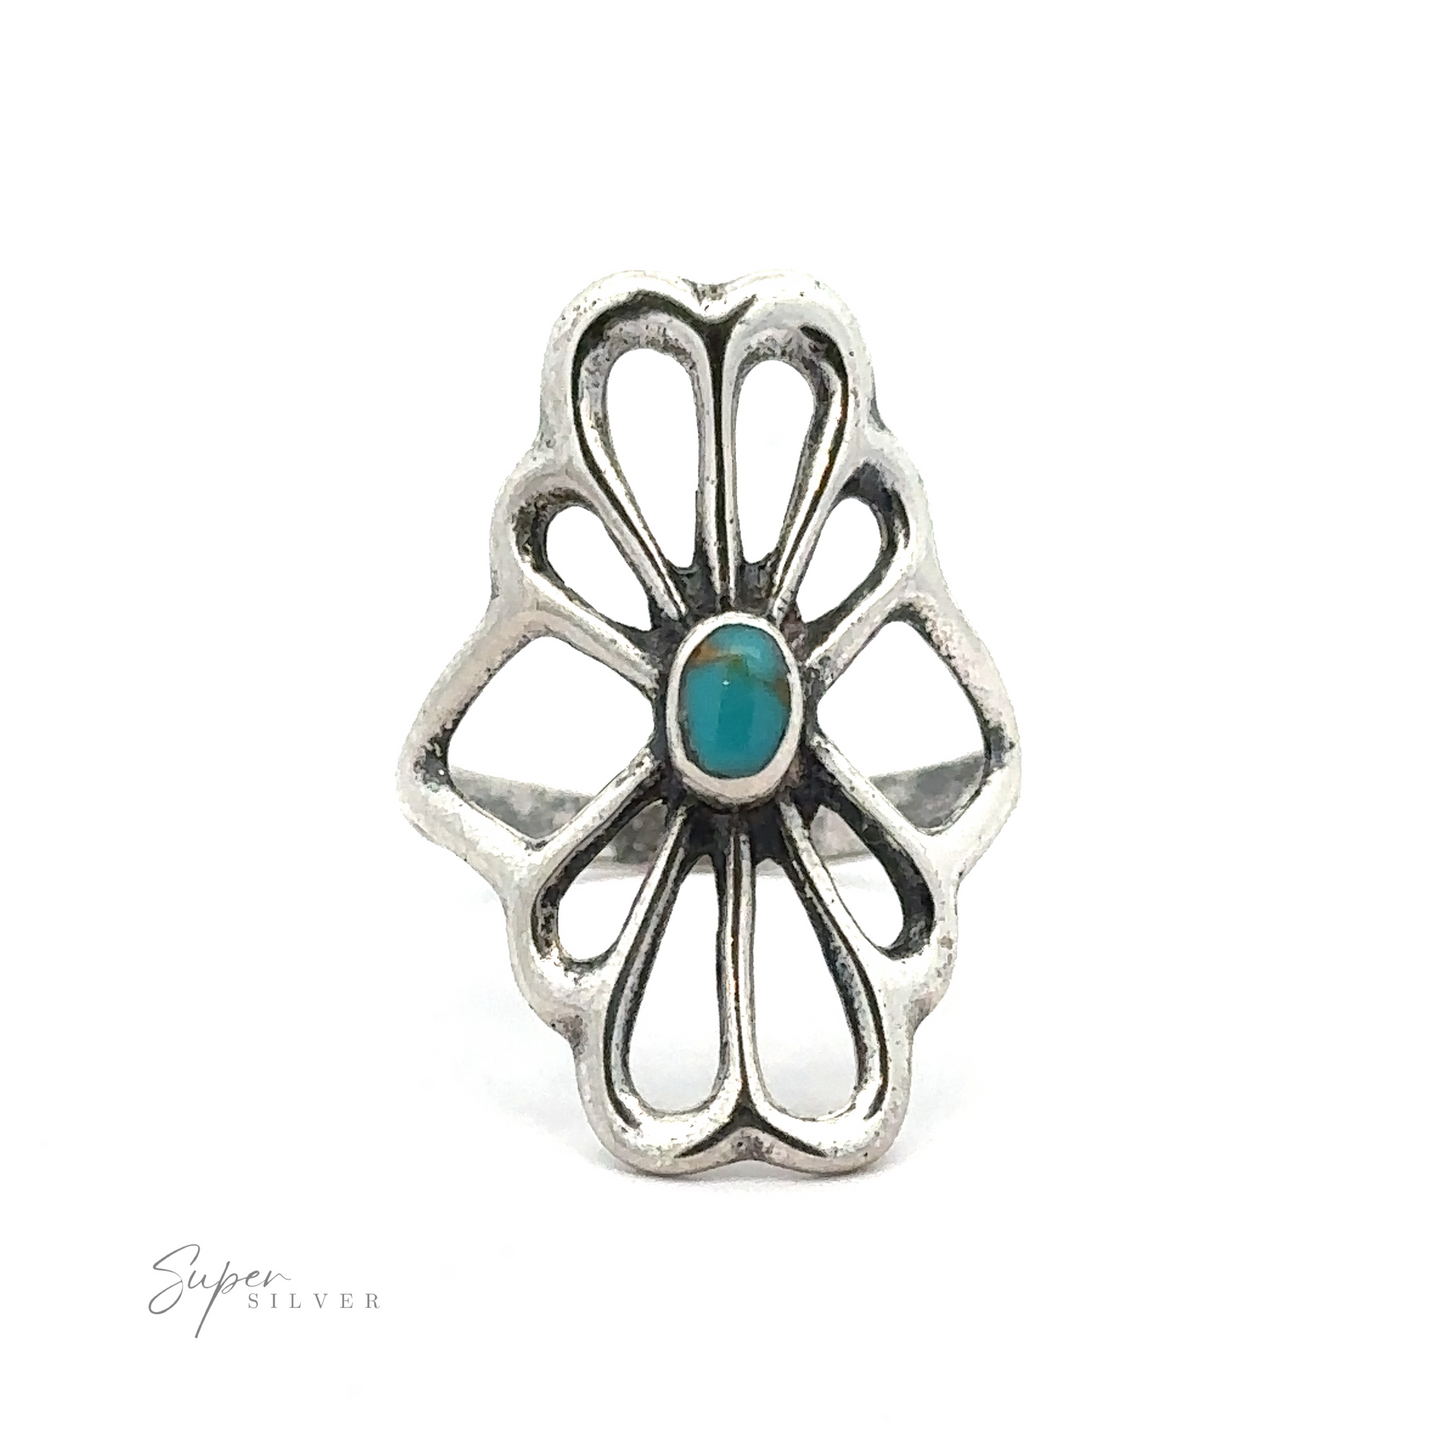 
                  
                    A sterling silver flower design ring featuring an ornate floral pattern with an oval turquoise stone in the center. Handcrafted in America, the brand name "American Made Flower Ring" is visible in the bottom left corner.
                  
                